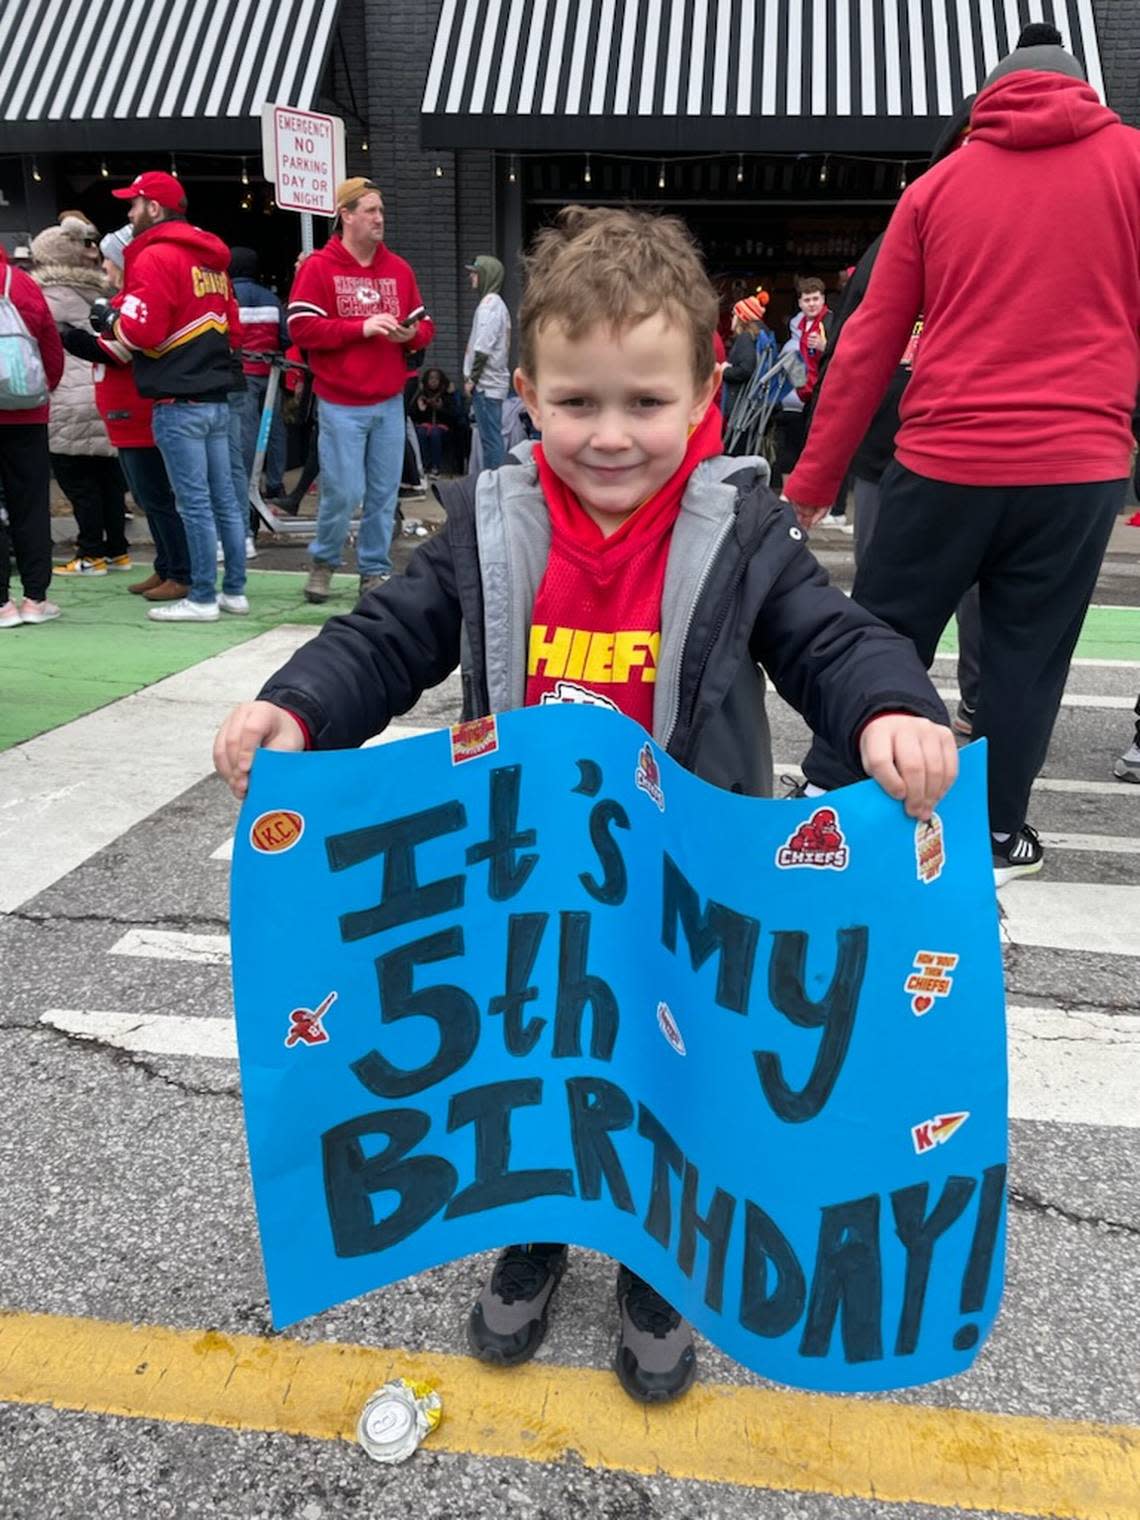 After multiple attempts, Cole Wilson was able to finish his sign shortly before the parade. He hoped it wouldl catch the eye of his heroes, Travis Kelce and Patrick Mahomes.